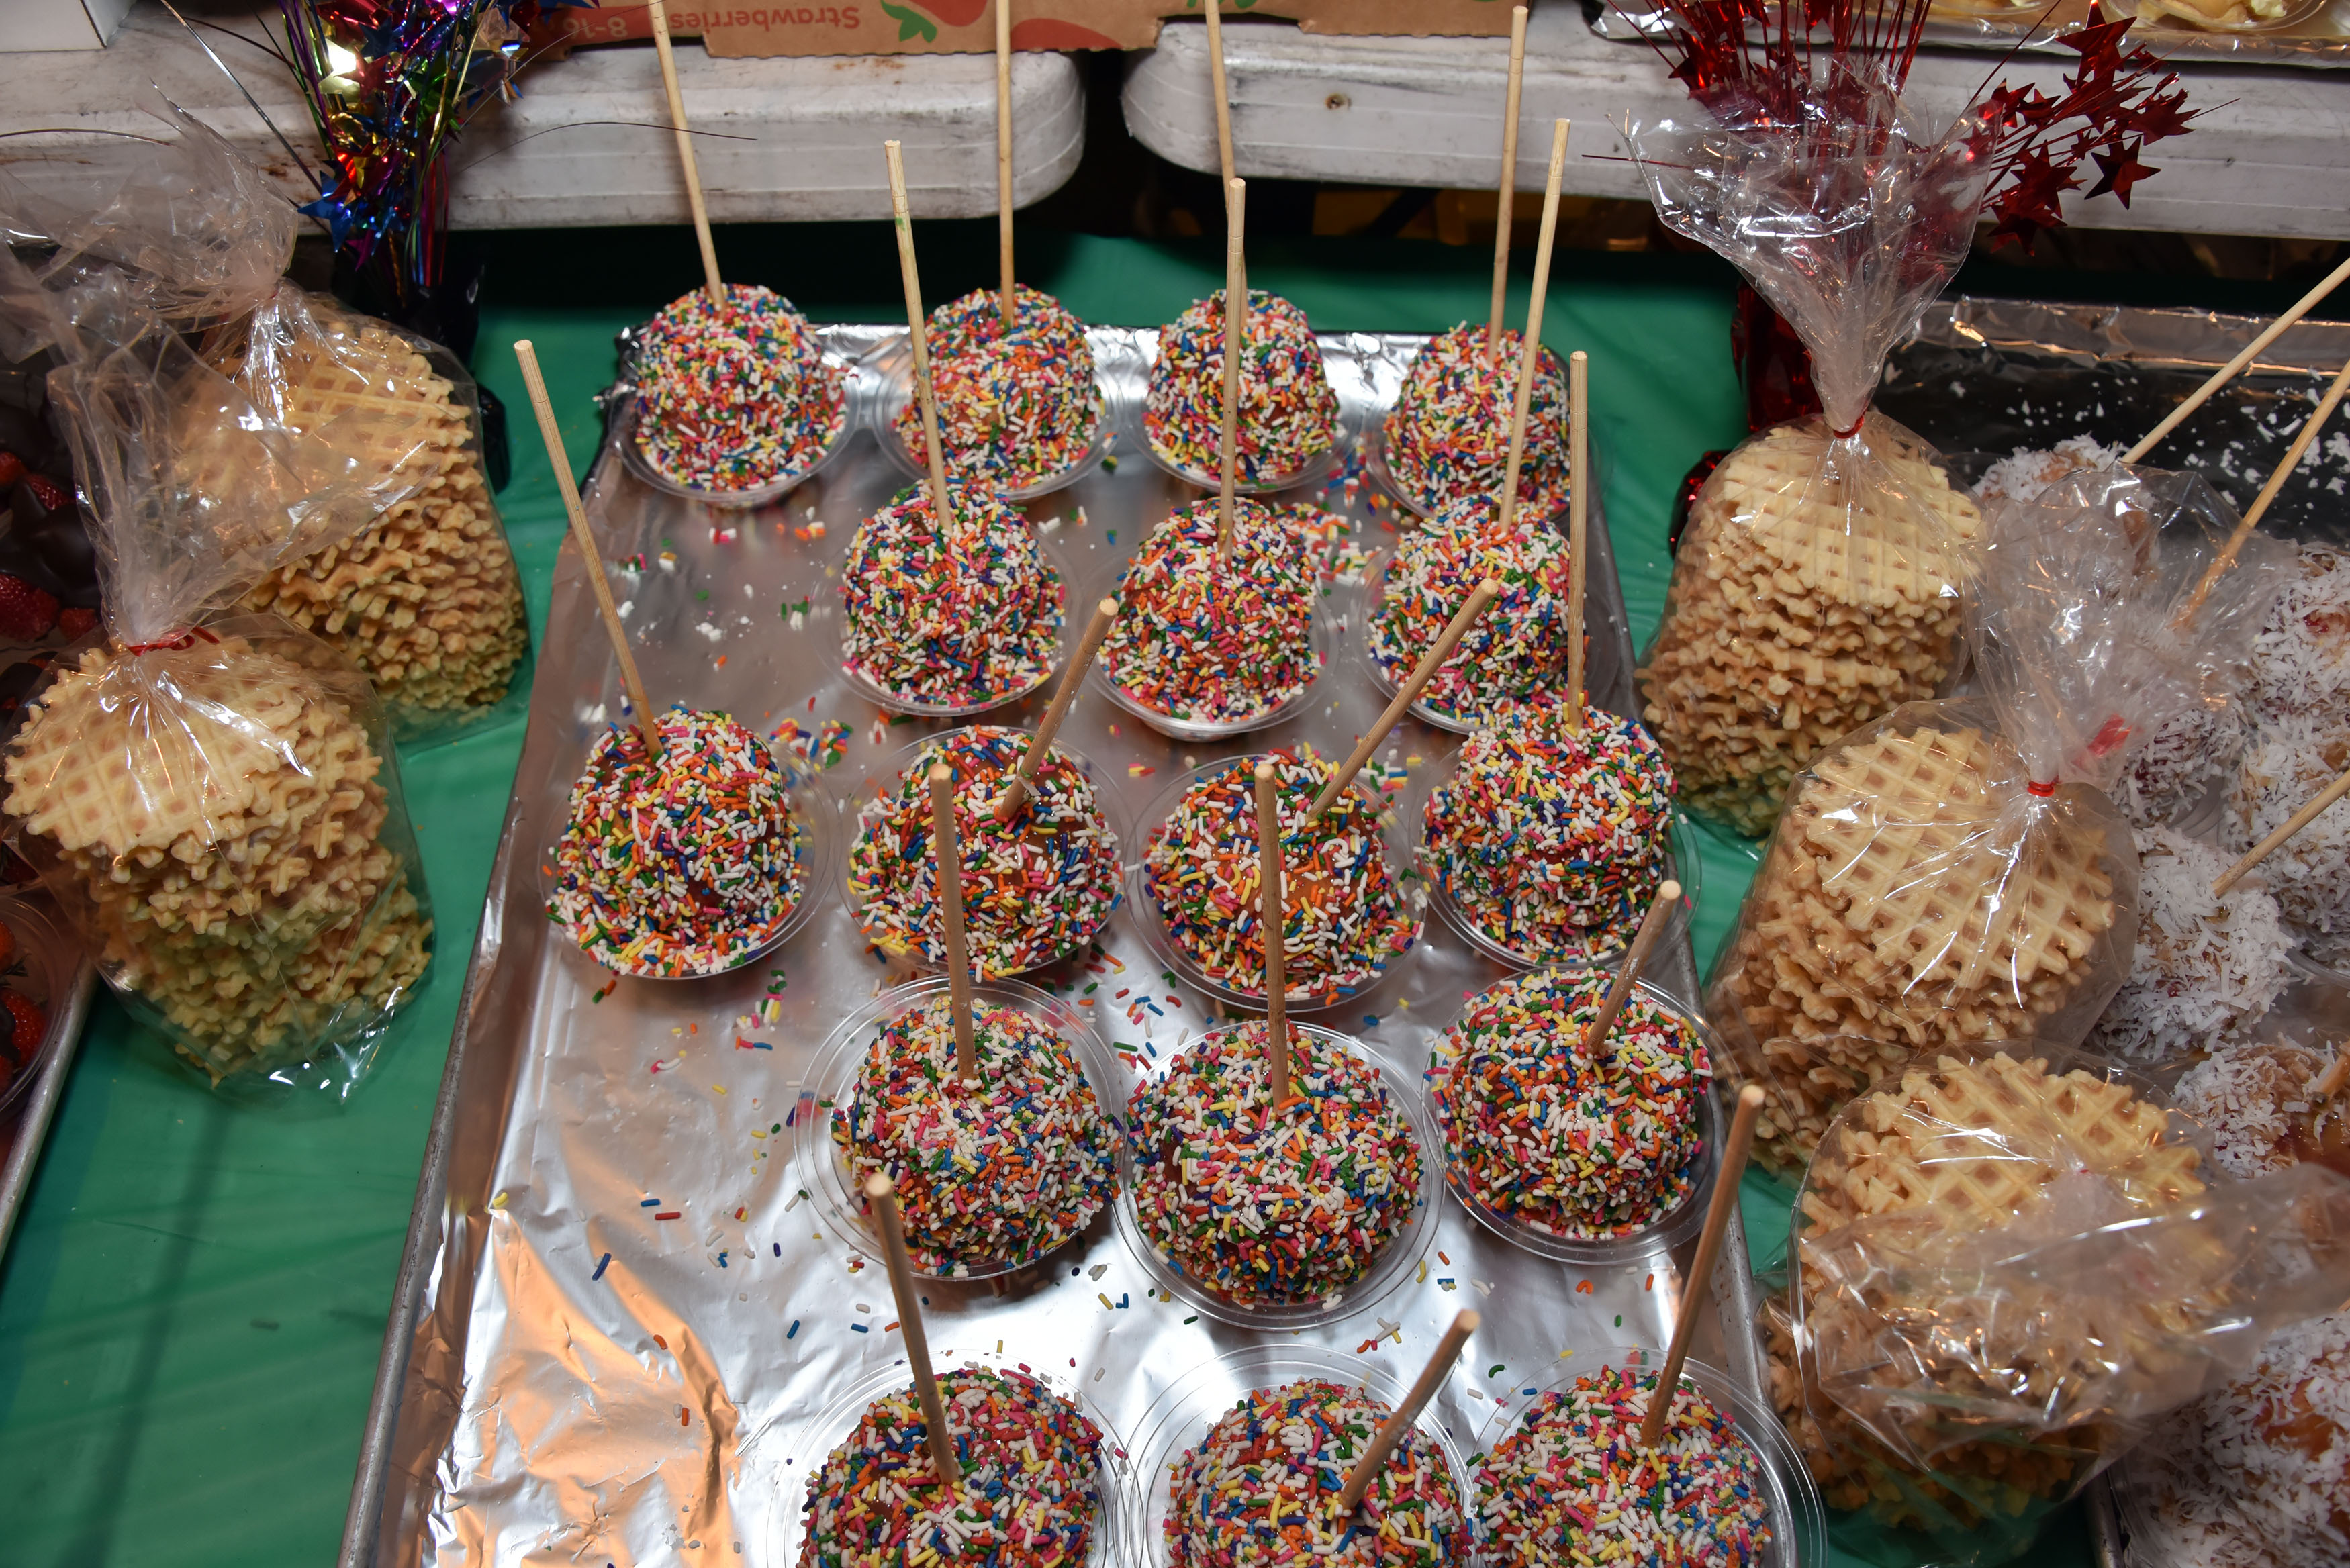 Fisherman's Feast Vendors - Candy Apples